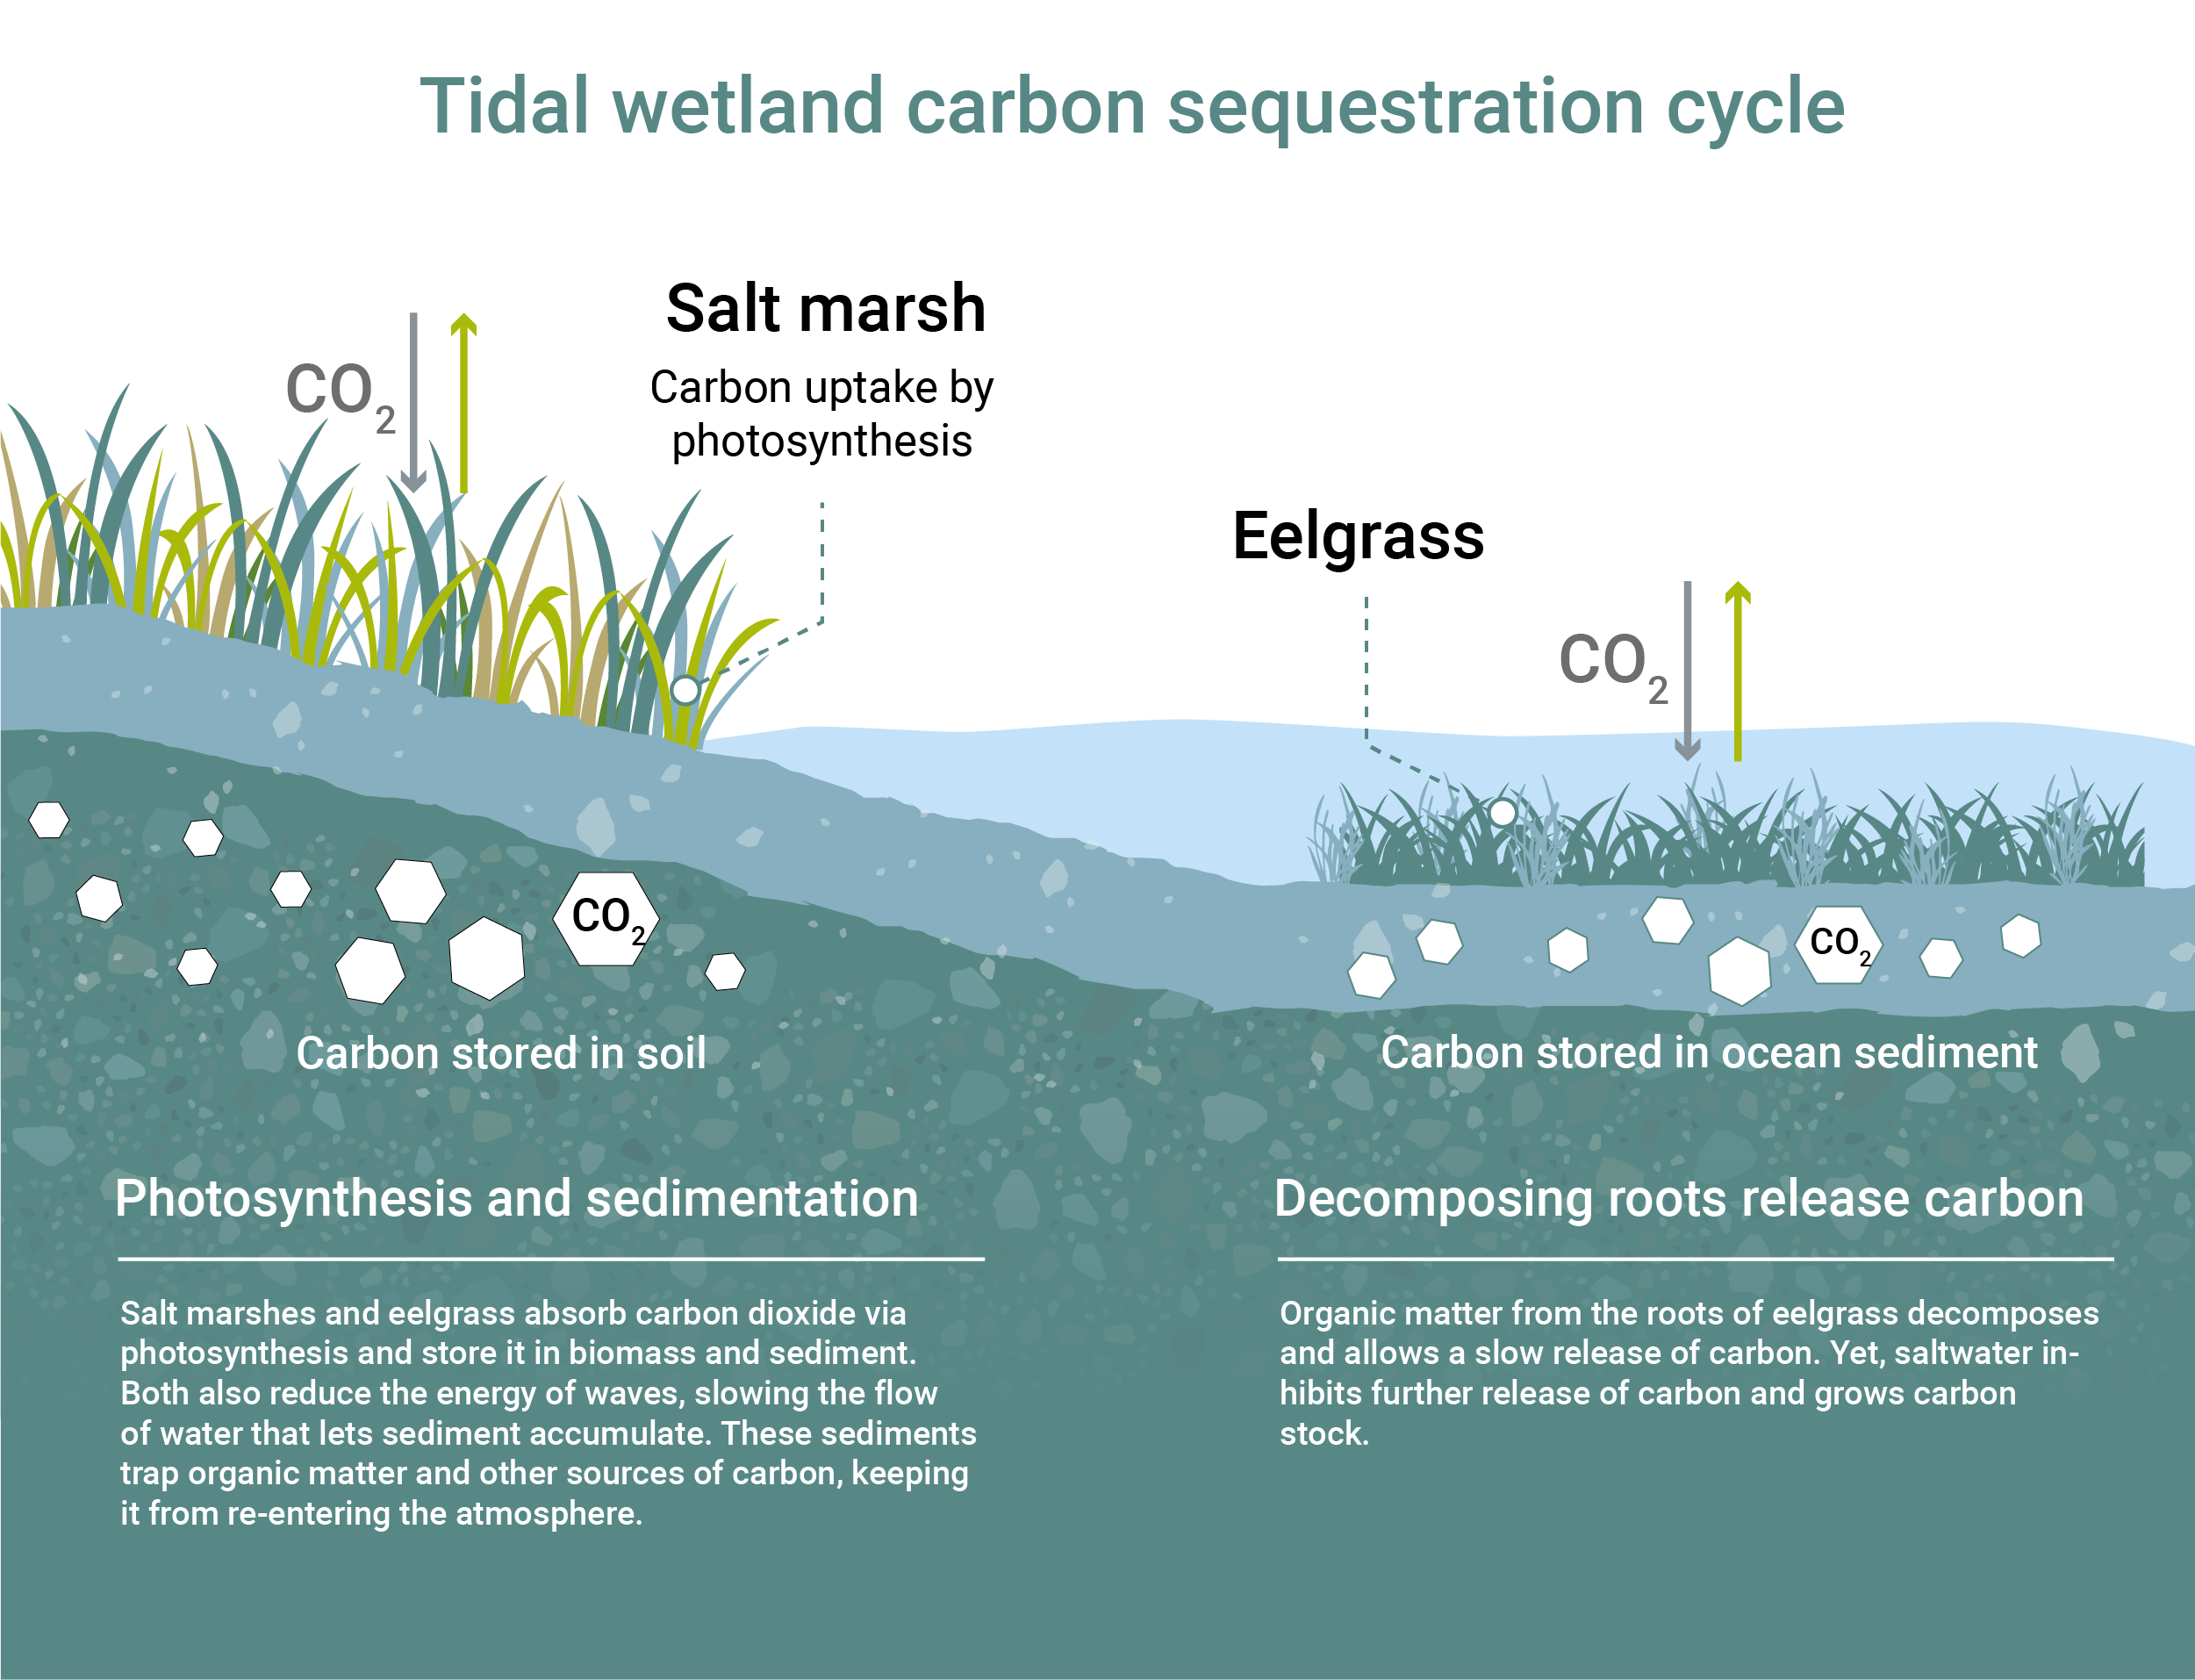 Tidal wetland carbon sequestration cycle